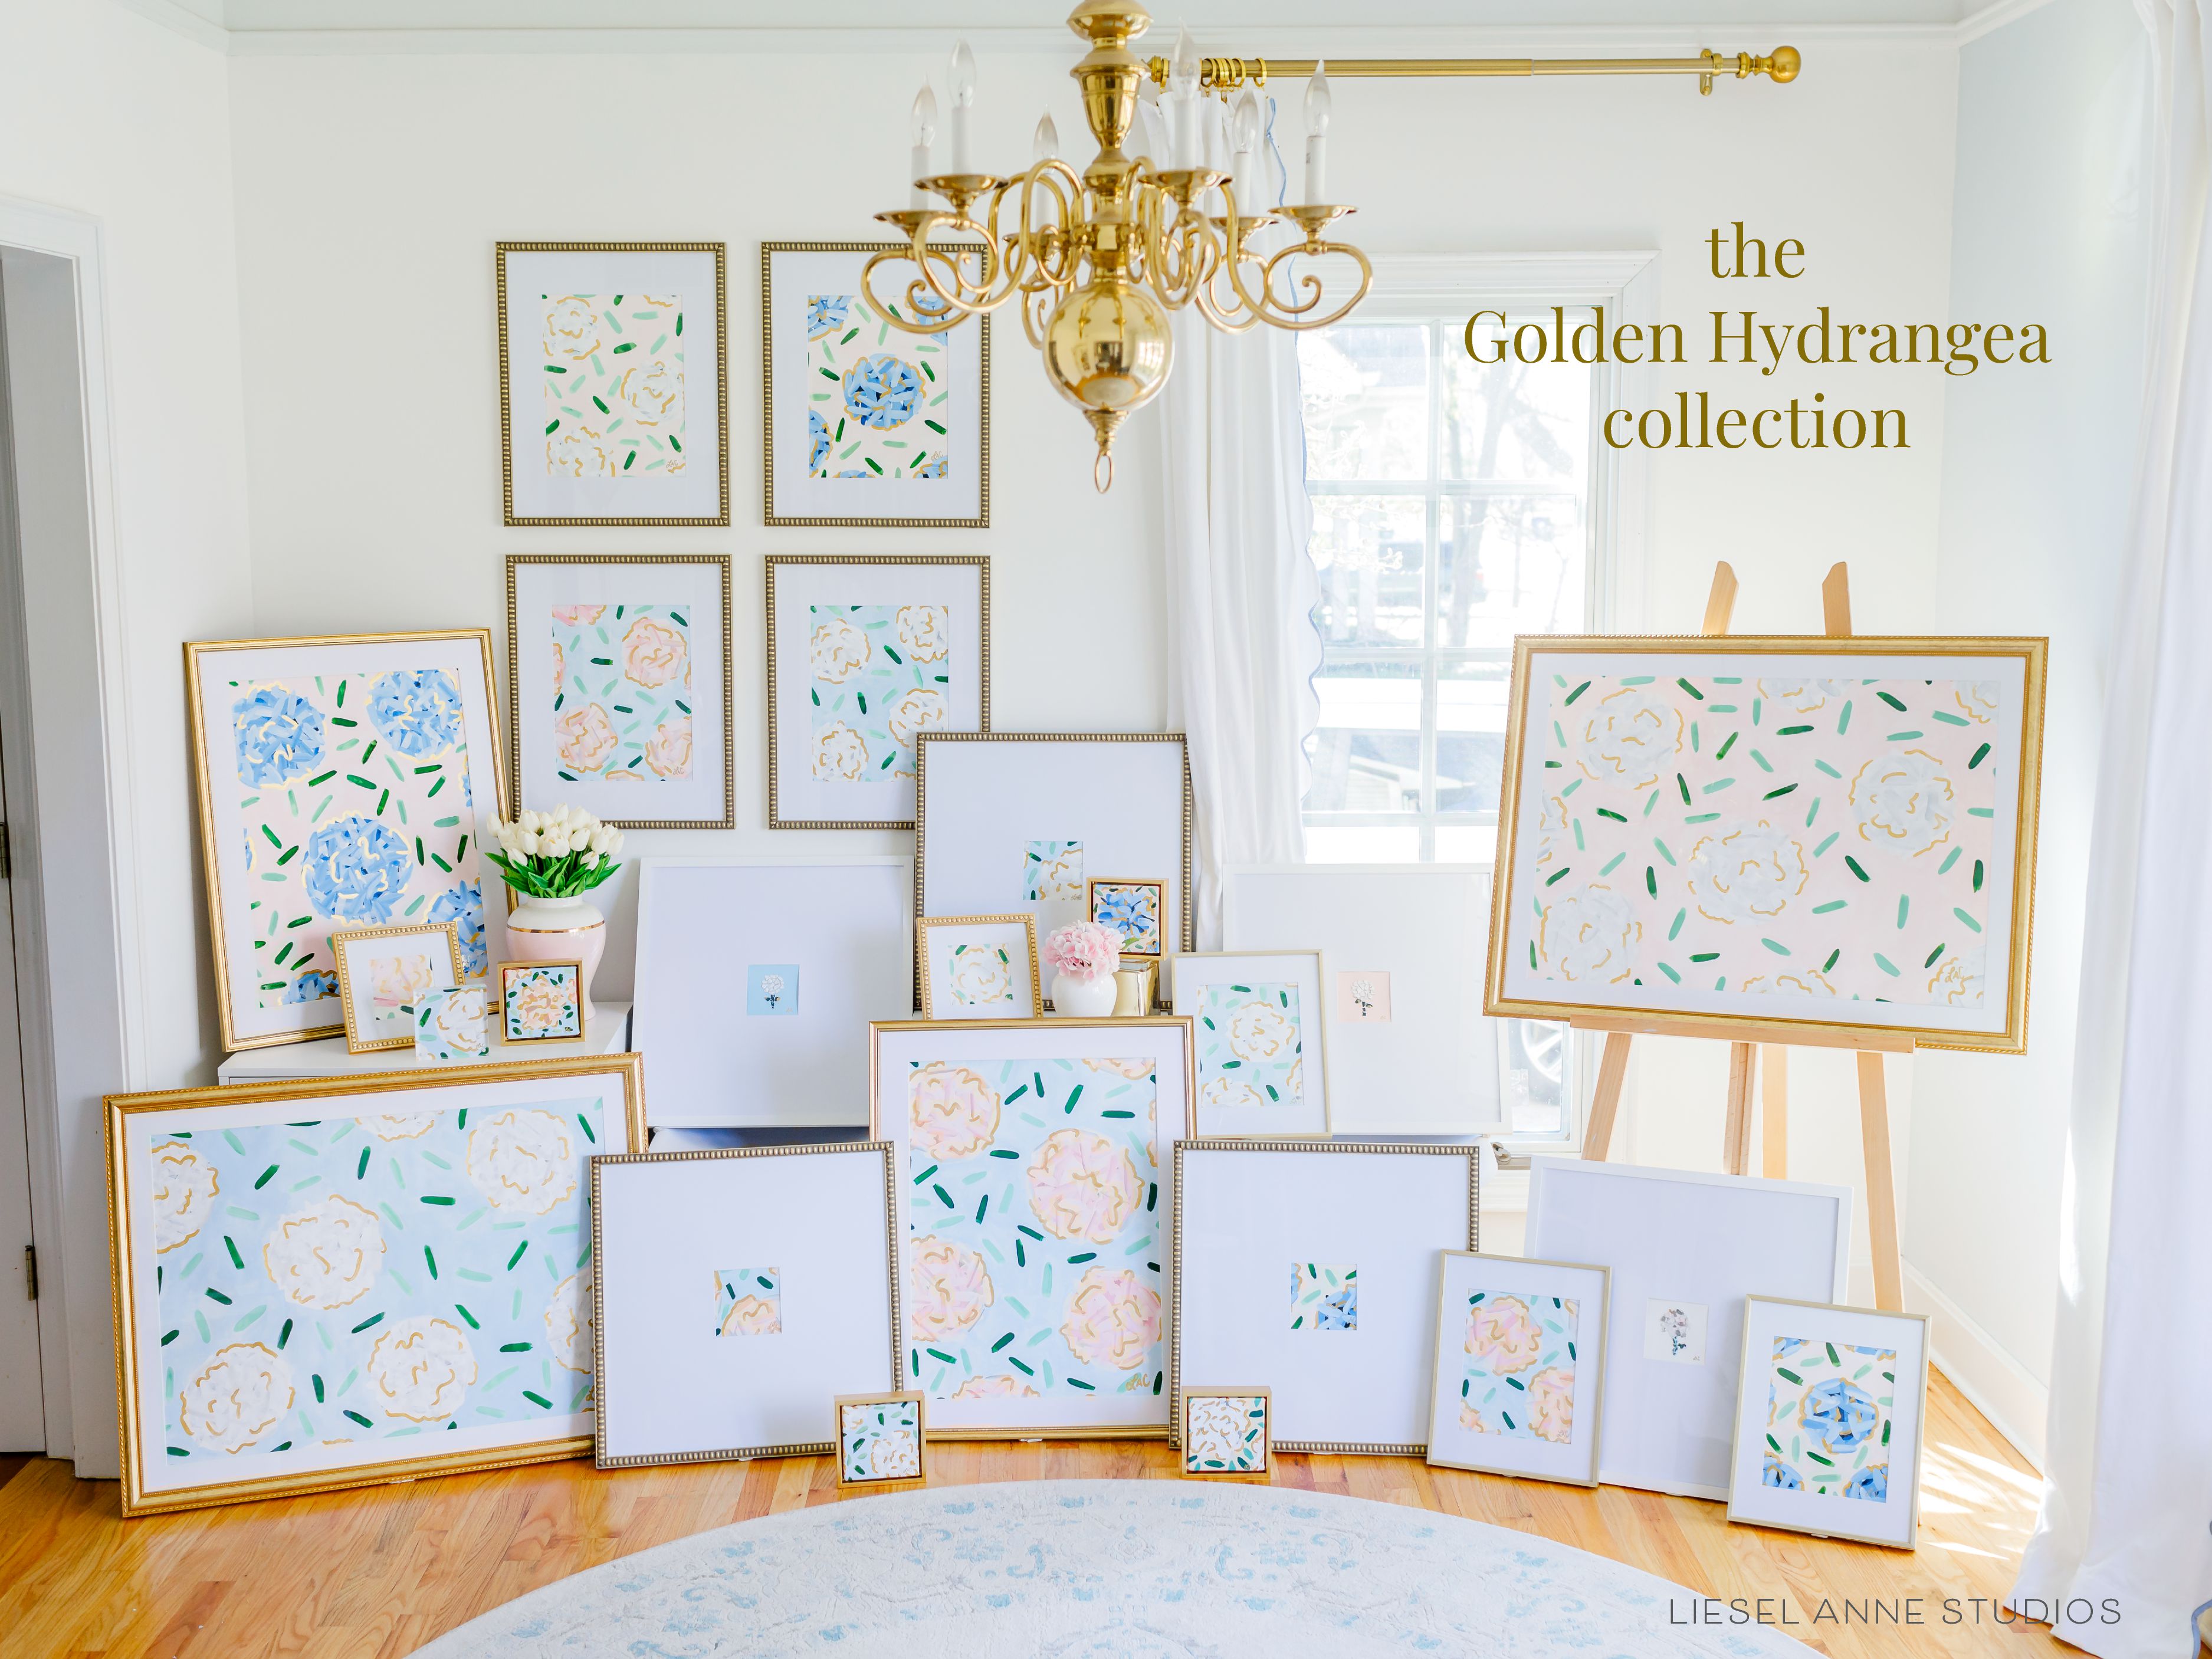 Golden Hydrangea | Blush & Blue I-Original artwork measures 18" x 24" | Hand-Painted with gouache on cold press watercolor paper | Matted and framed in gold wood frame sized 22" x 28" | UV shielding acrylic glass | Hanging hardware included | Features our signature Golden Hydrangea design with a pale pink base, blue hydrangeas and shimmery gold accents | Initialed in gold by the Liesel Anne (the artist) on the front and signed and dated on the back.-The Singing Little Bird